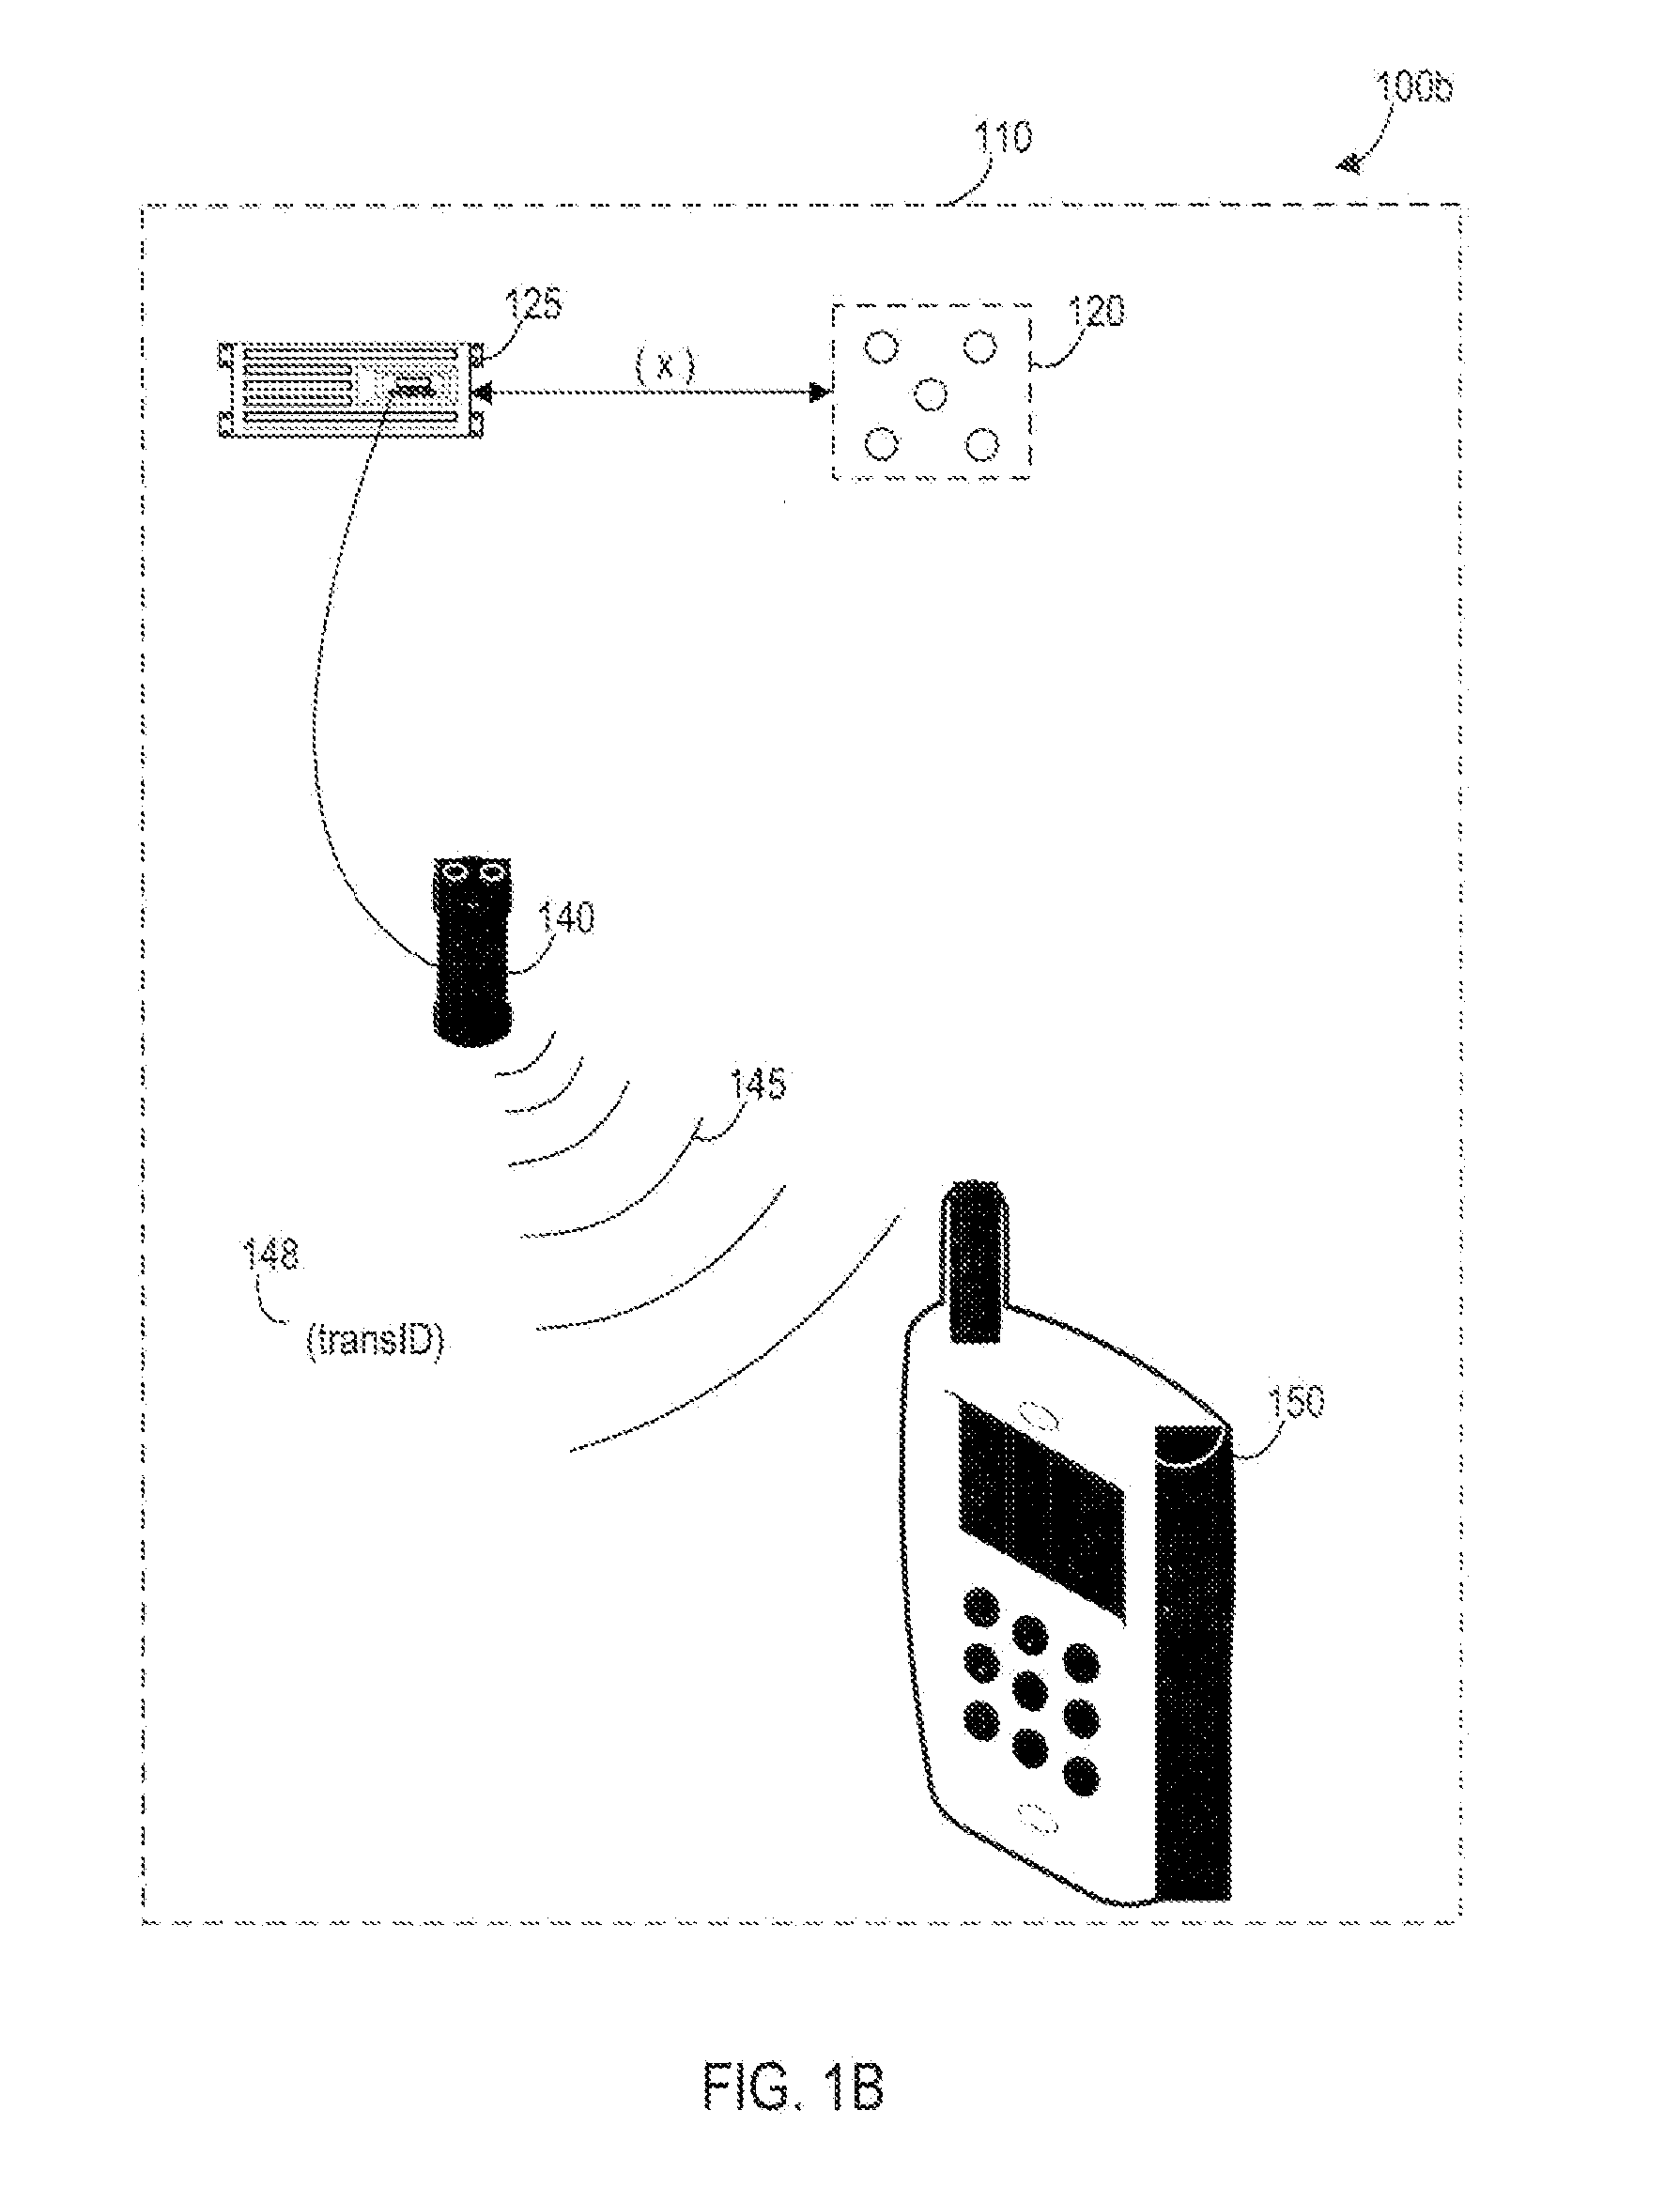 Systems, Methods, and Devices for Policy-Based Control and Monitoring of Use of Mobile Devices by Vehicle Operators